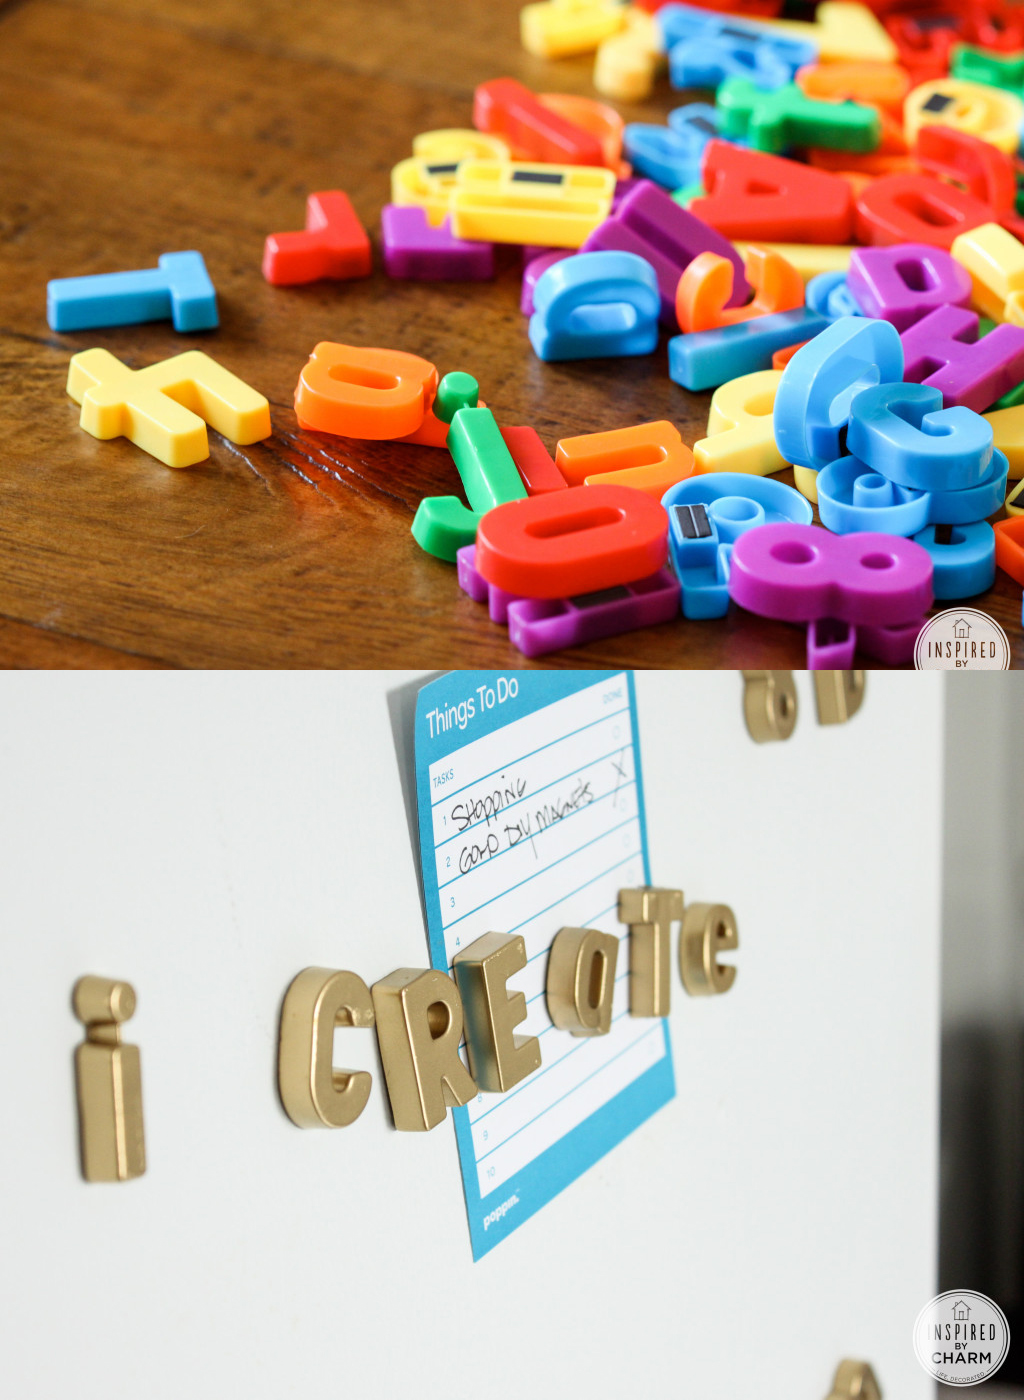 Awesome Spray Paint Makeover Idea - spray cheap alphabet magnets with gold paint